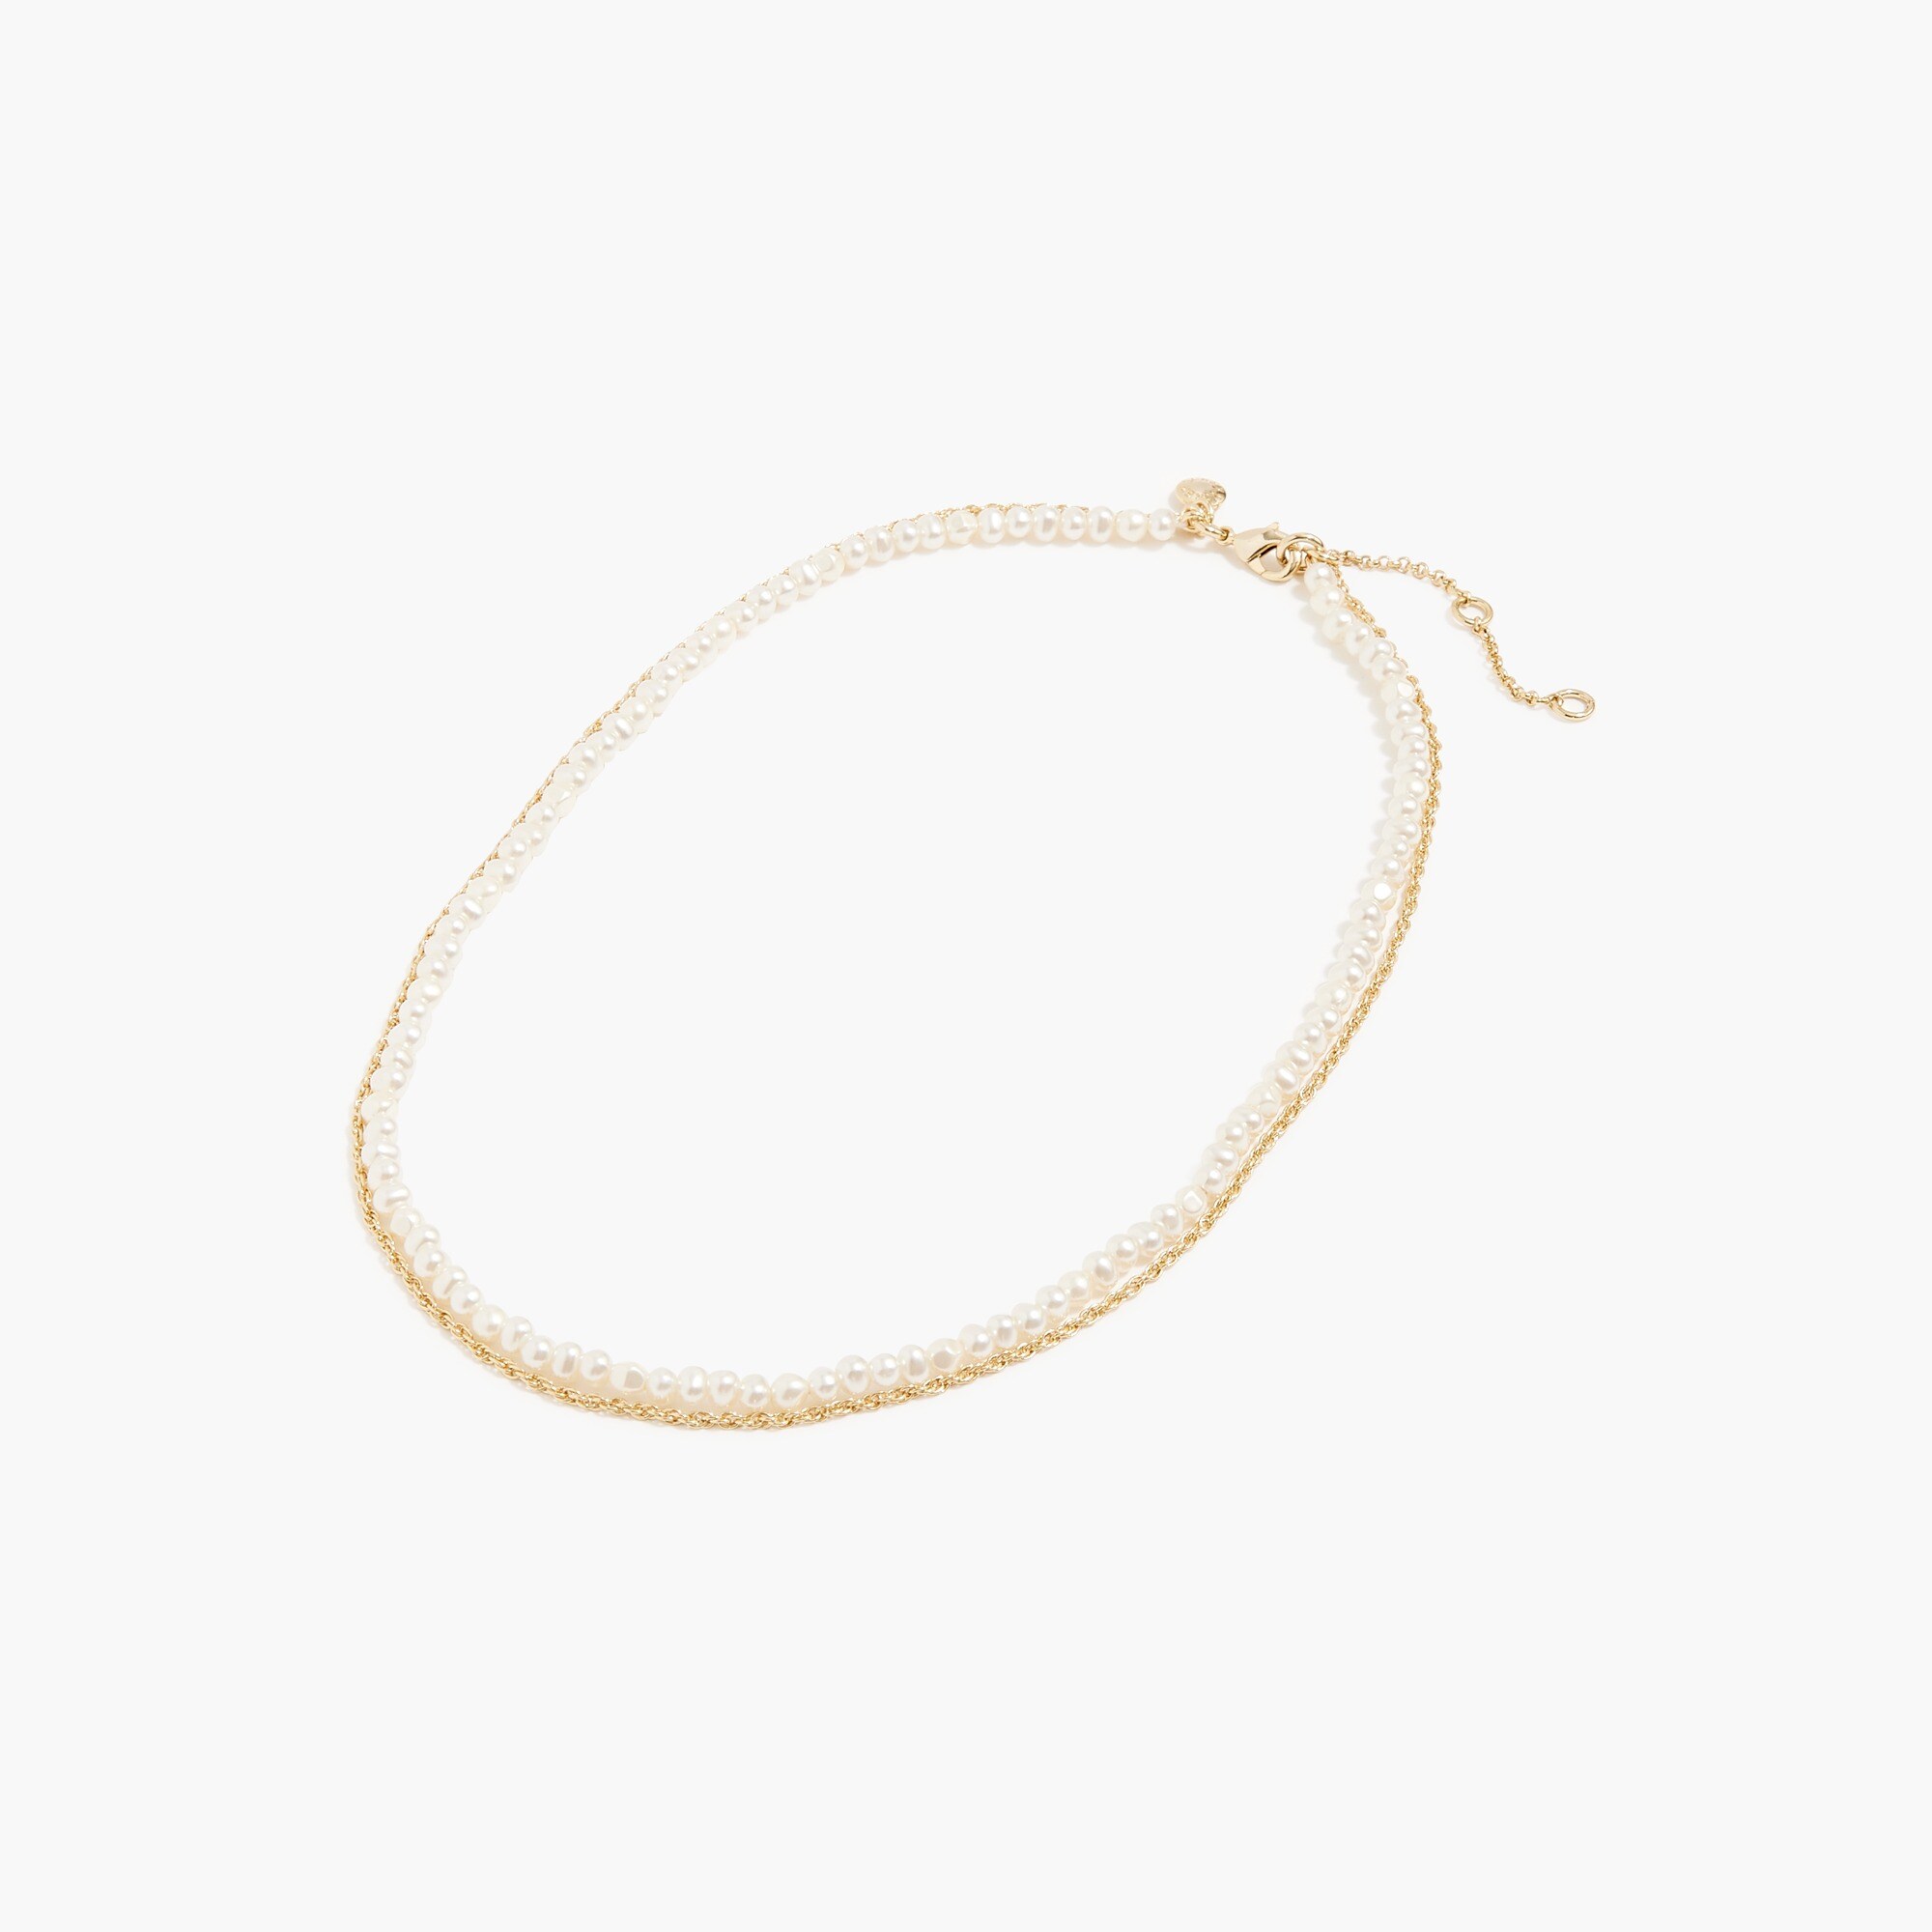  Pearl and gold chain necklace